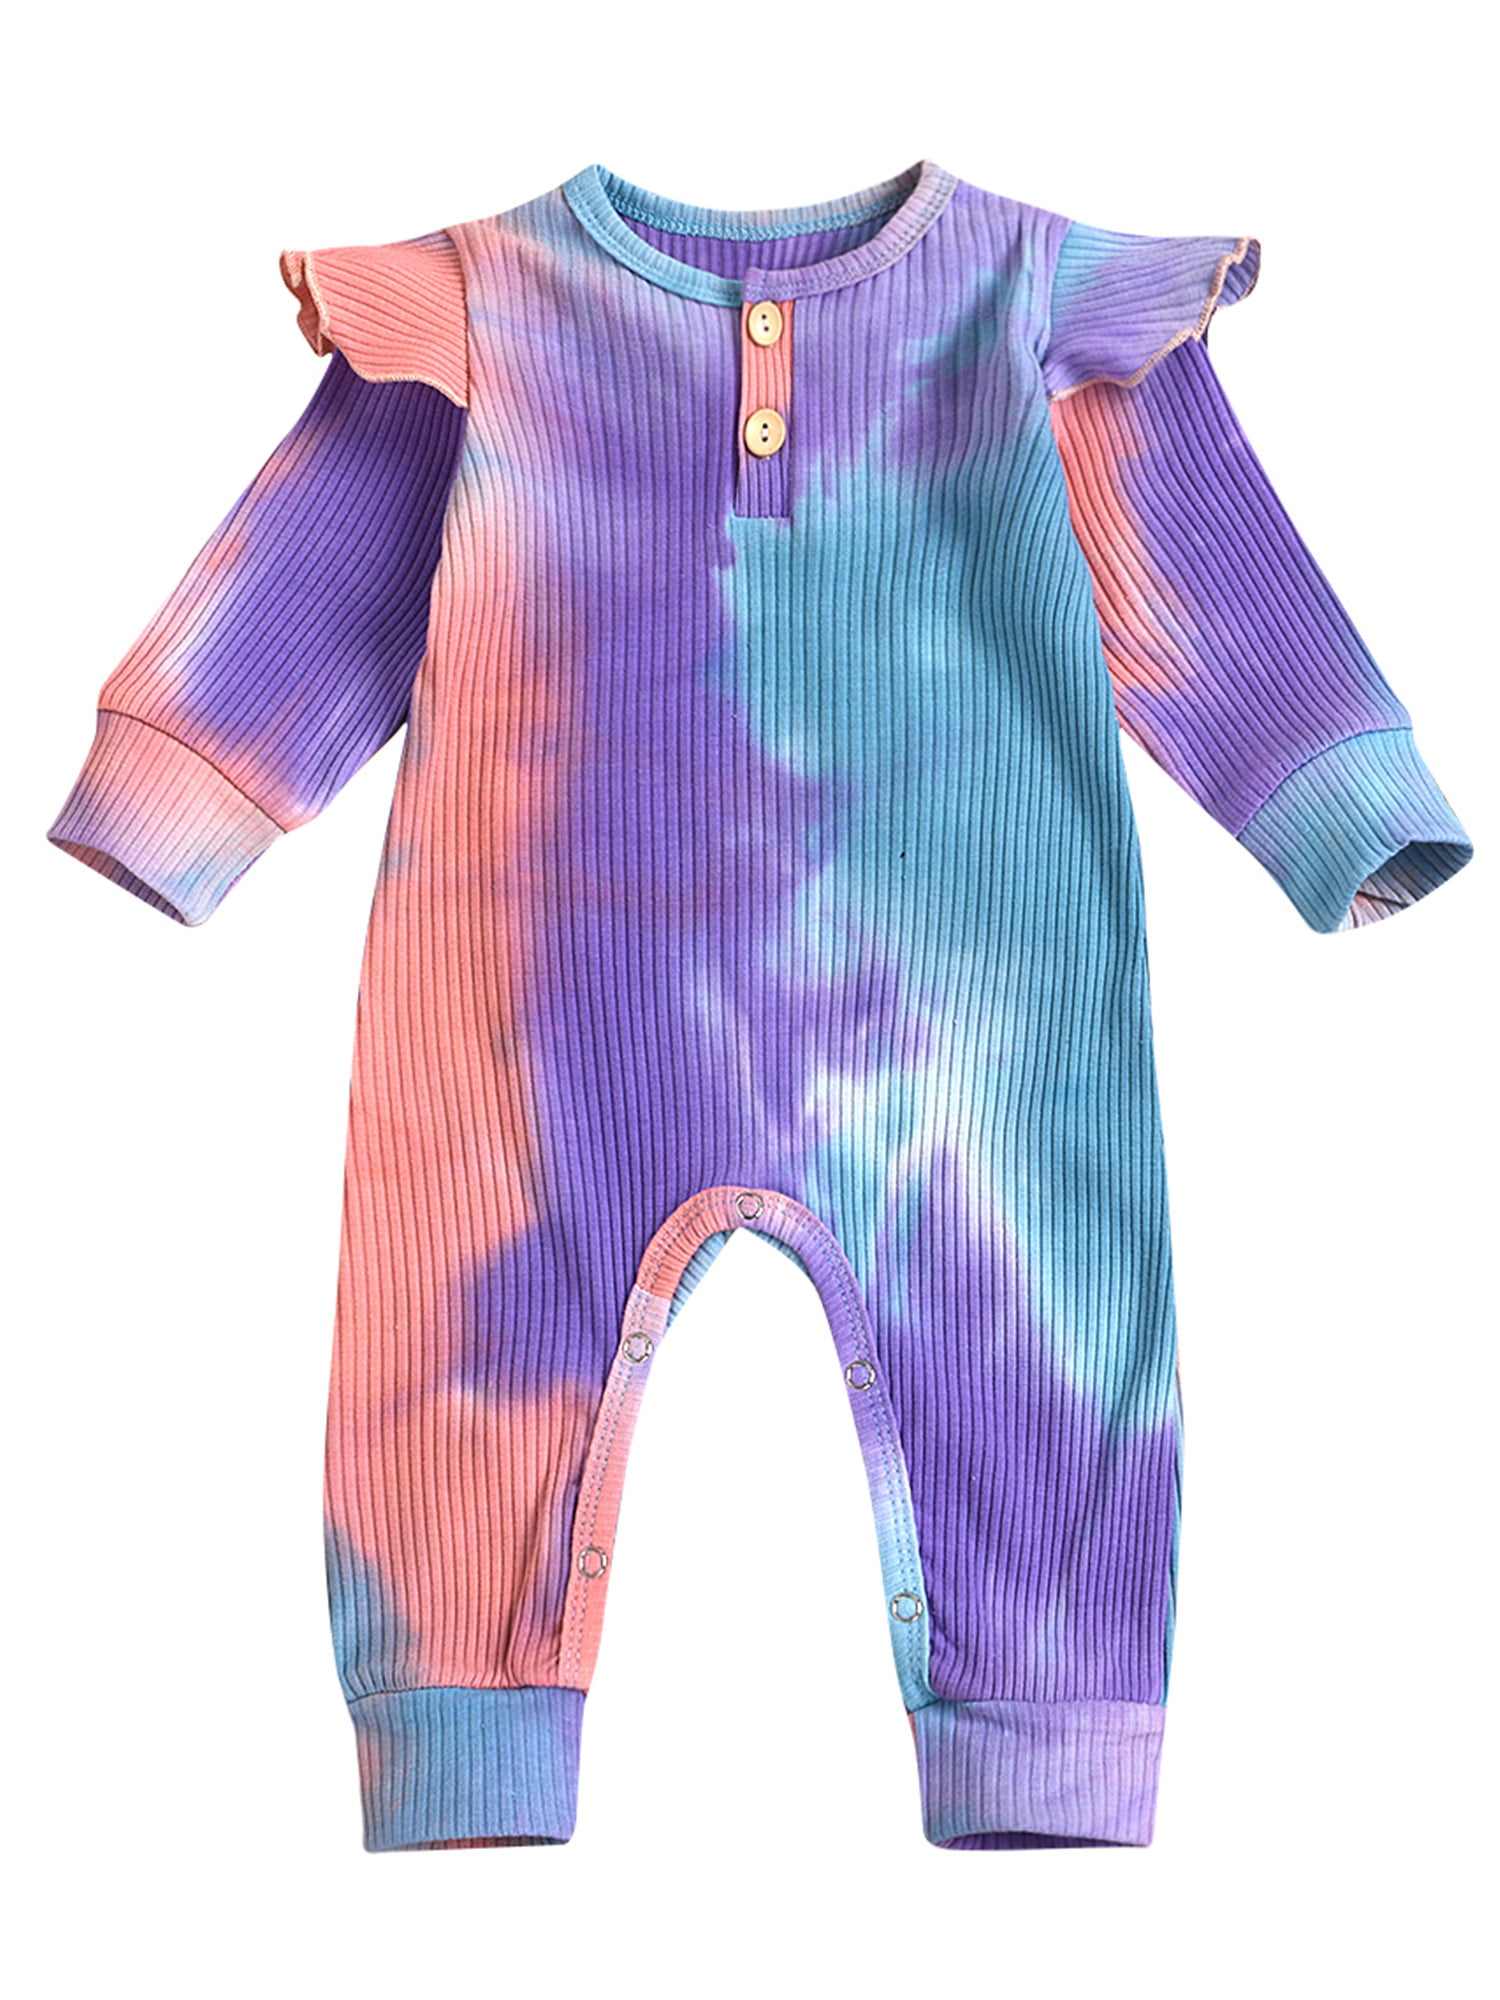 Halloween Outfit Long Sleeve Spider Romper Baby Footed Pajamas Girl Boy Onesies Toddler Cotton Sleepwear